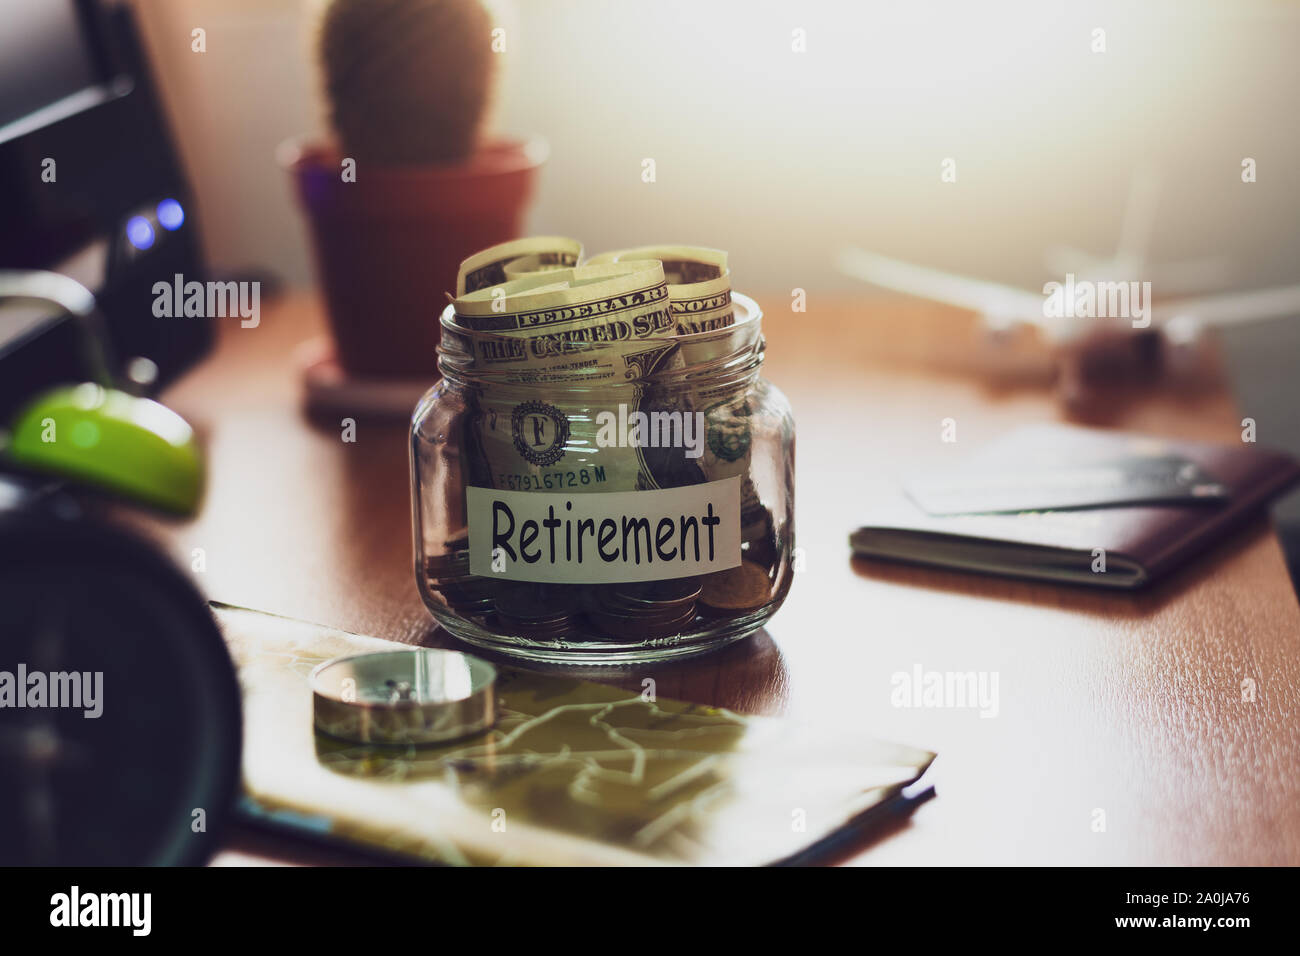 Retirement budget concept. Money for retirement savings in a glass jar with compass, passport, clock, credit card, aircraft toy and world map on worki Stock Photo